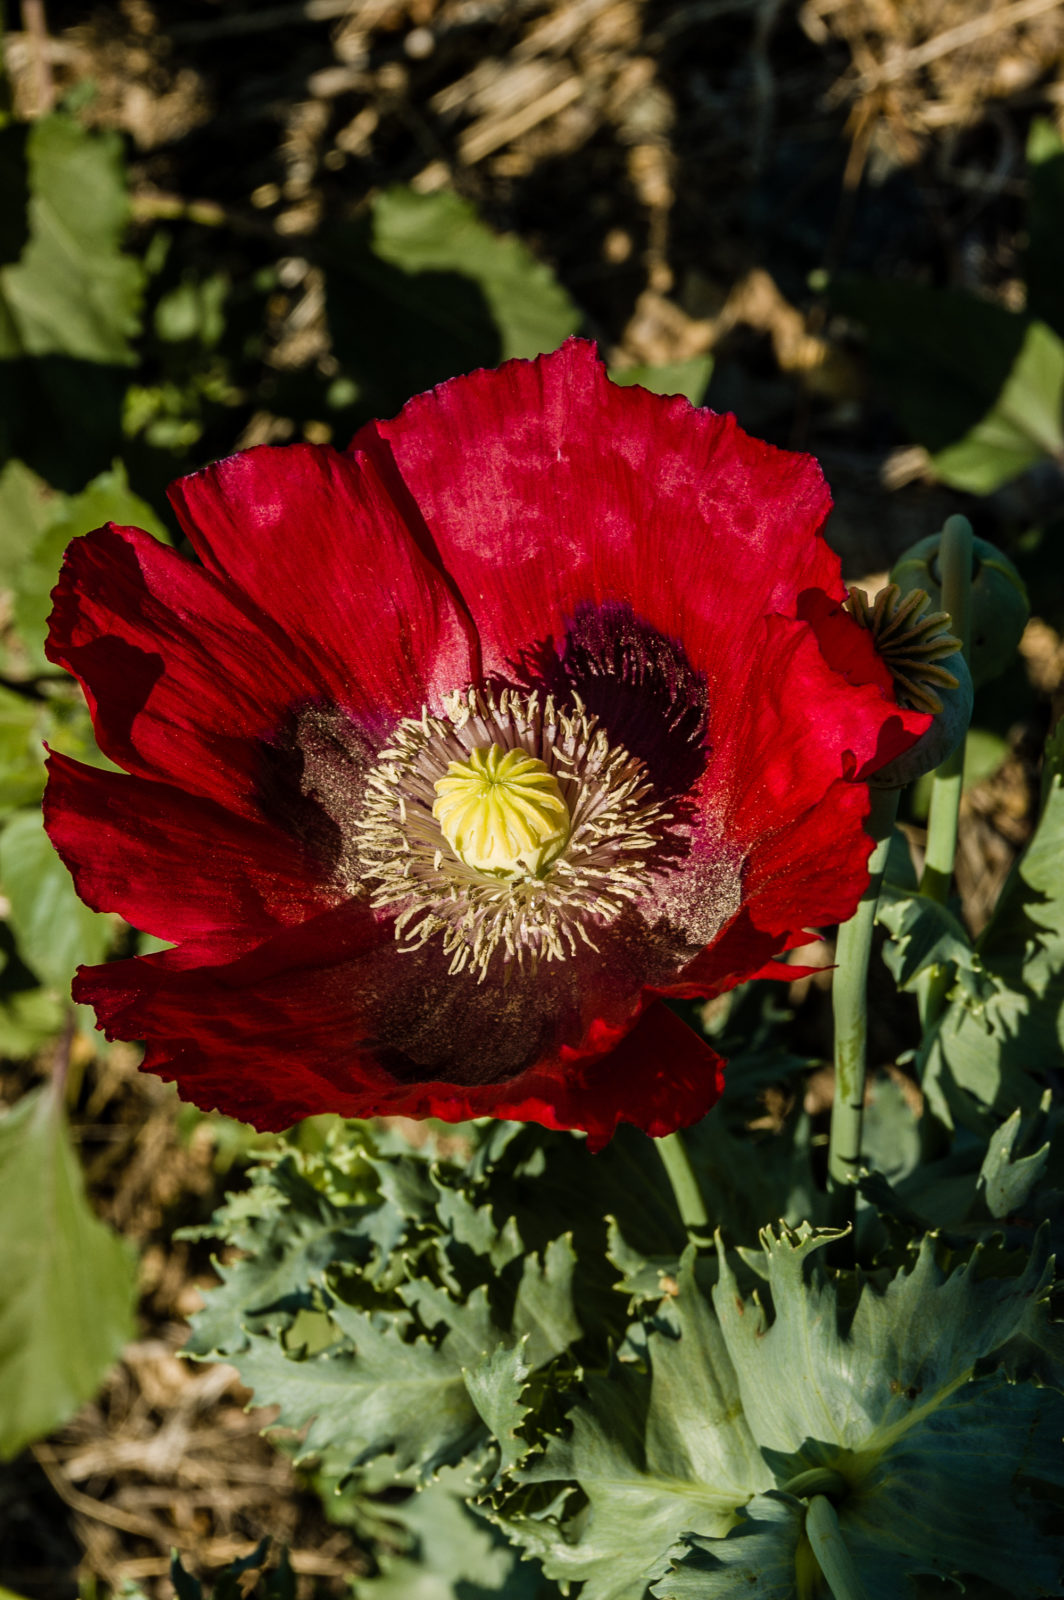 A poppy bloom up close